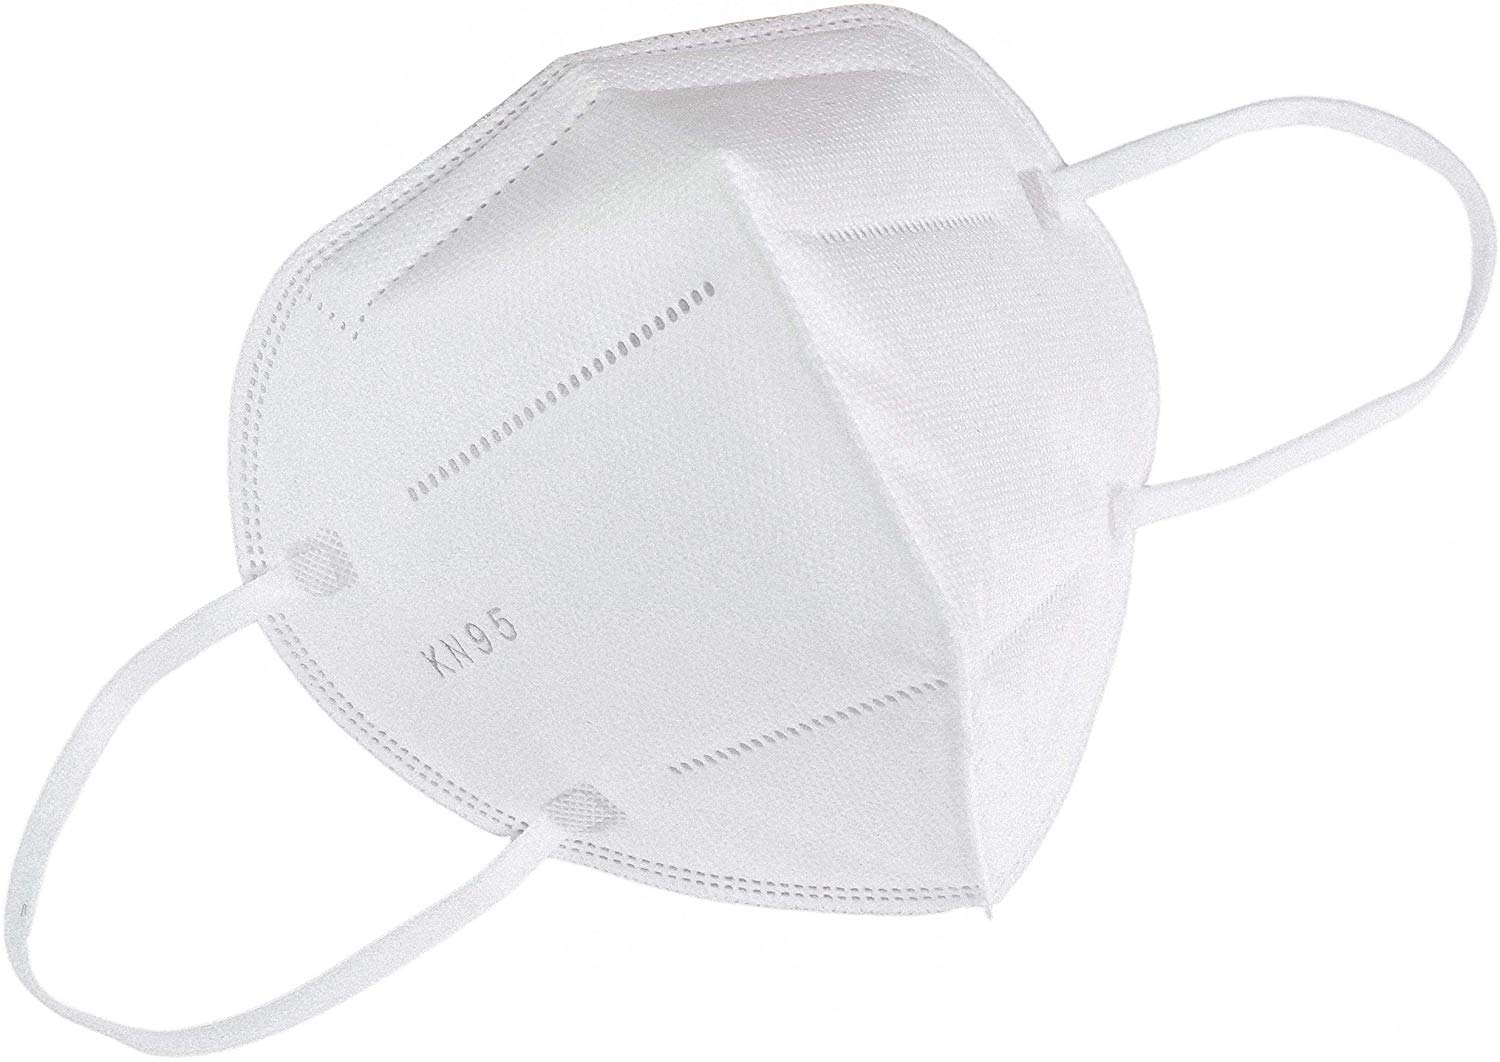 N95-Respirator-Mask-Surgical-Medical-Face-Mask-Disposable-Masks-for-Germ-Protection_6